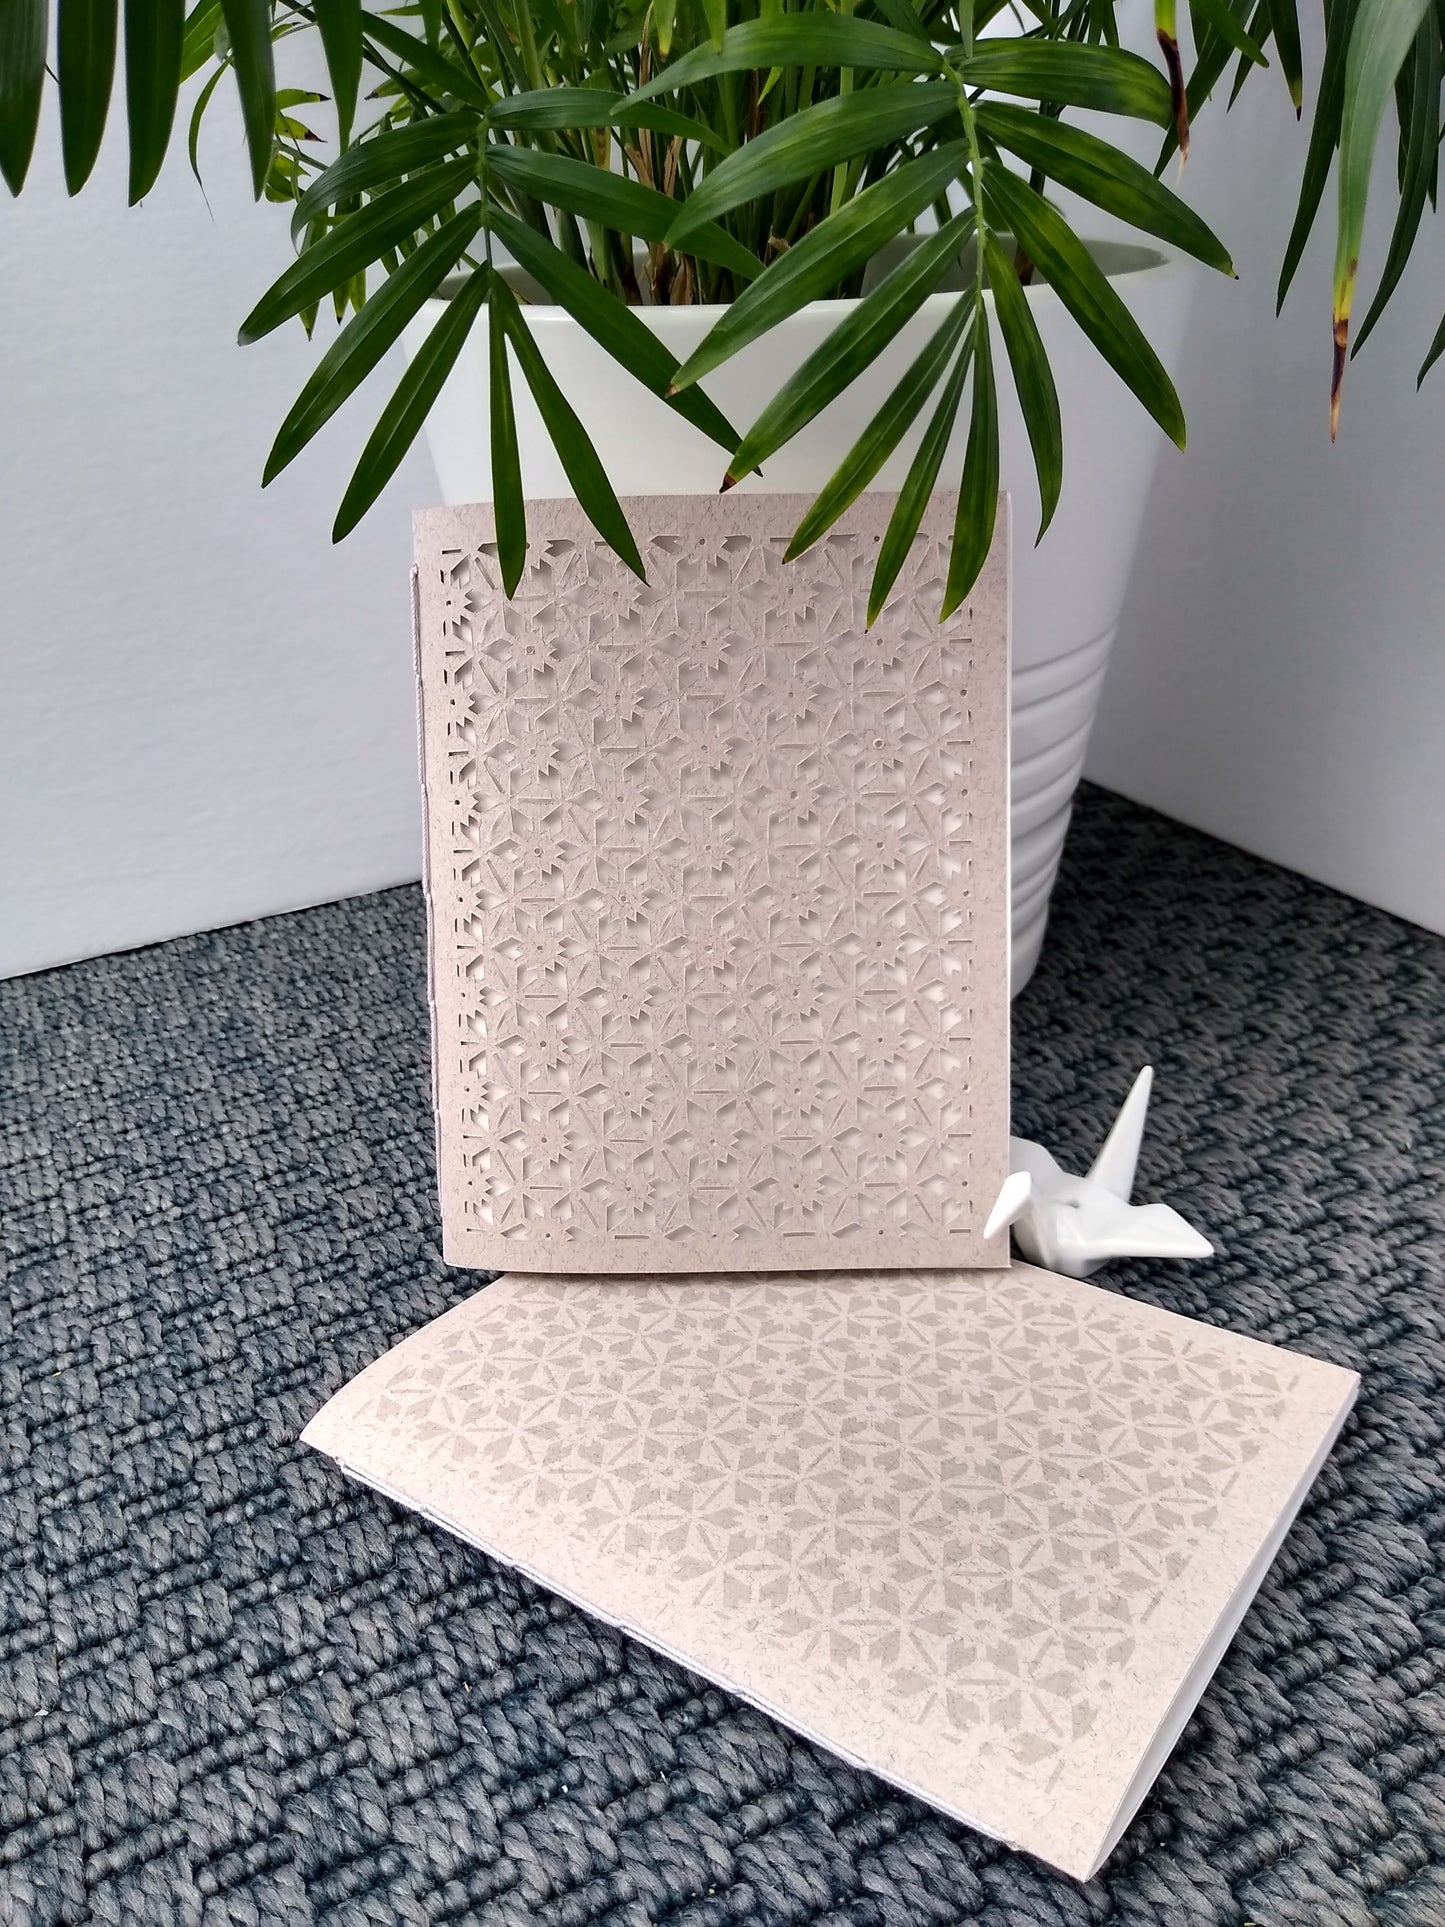 Two gray notebooks are displayed on a grey carpet. Next to them is a potted plant and ceramic crane. Both notebooks have a geometric and hexagonal floral pattern, repeated across the entire cover. One is cut the other is printed.